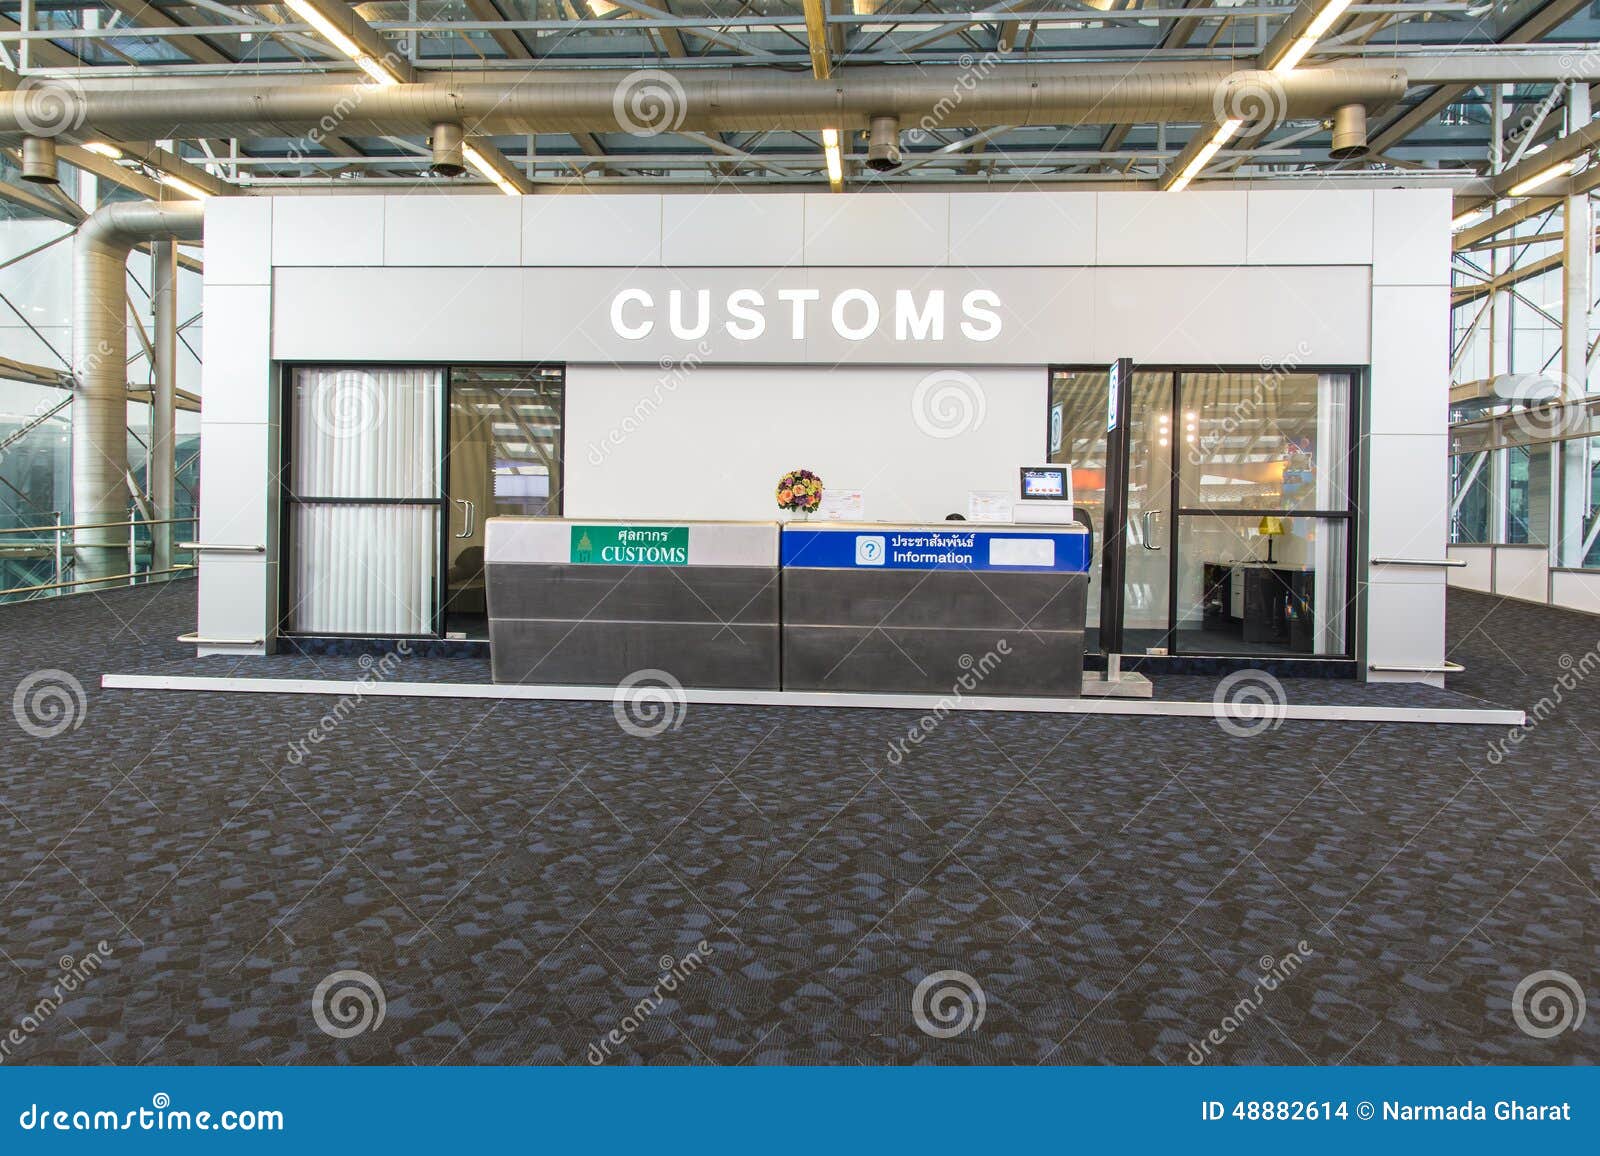 immigration customs check counter at airport